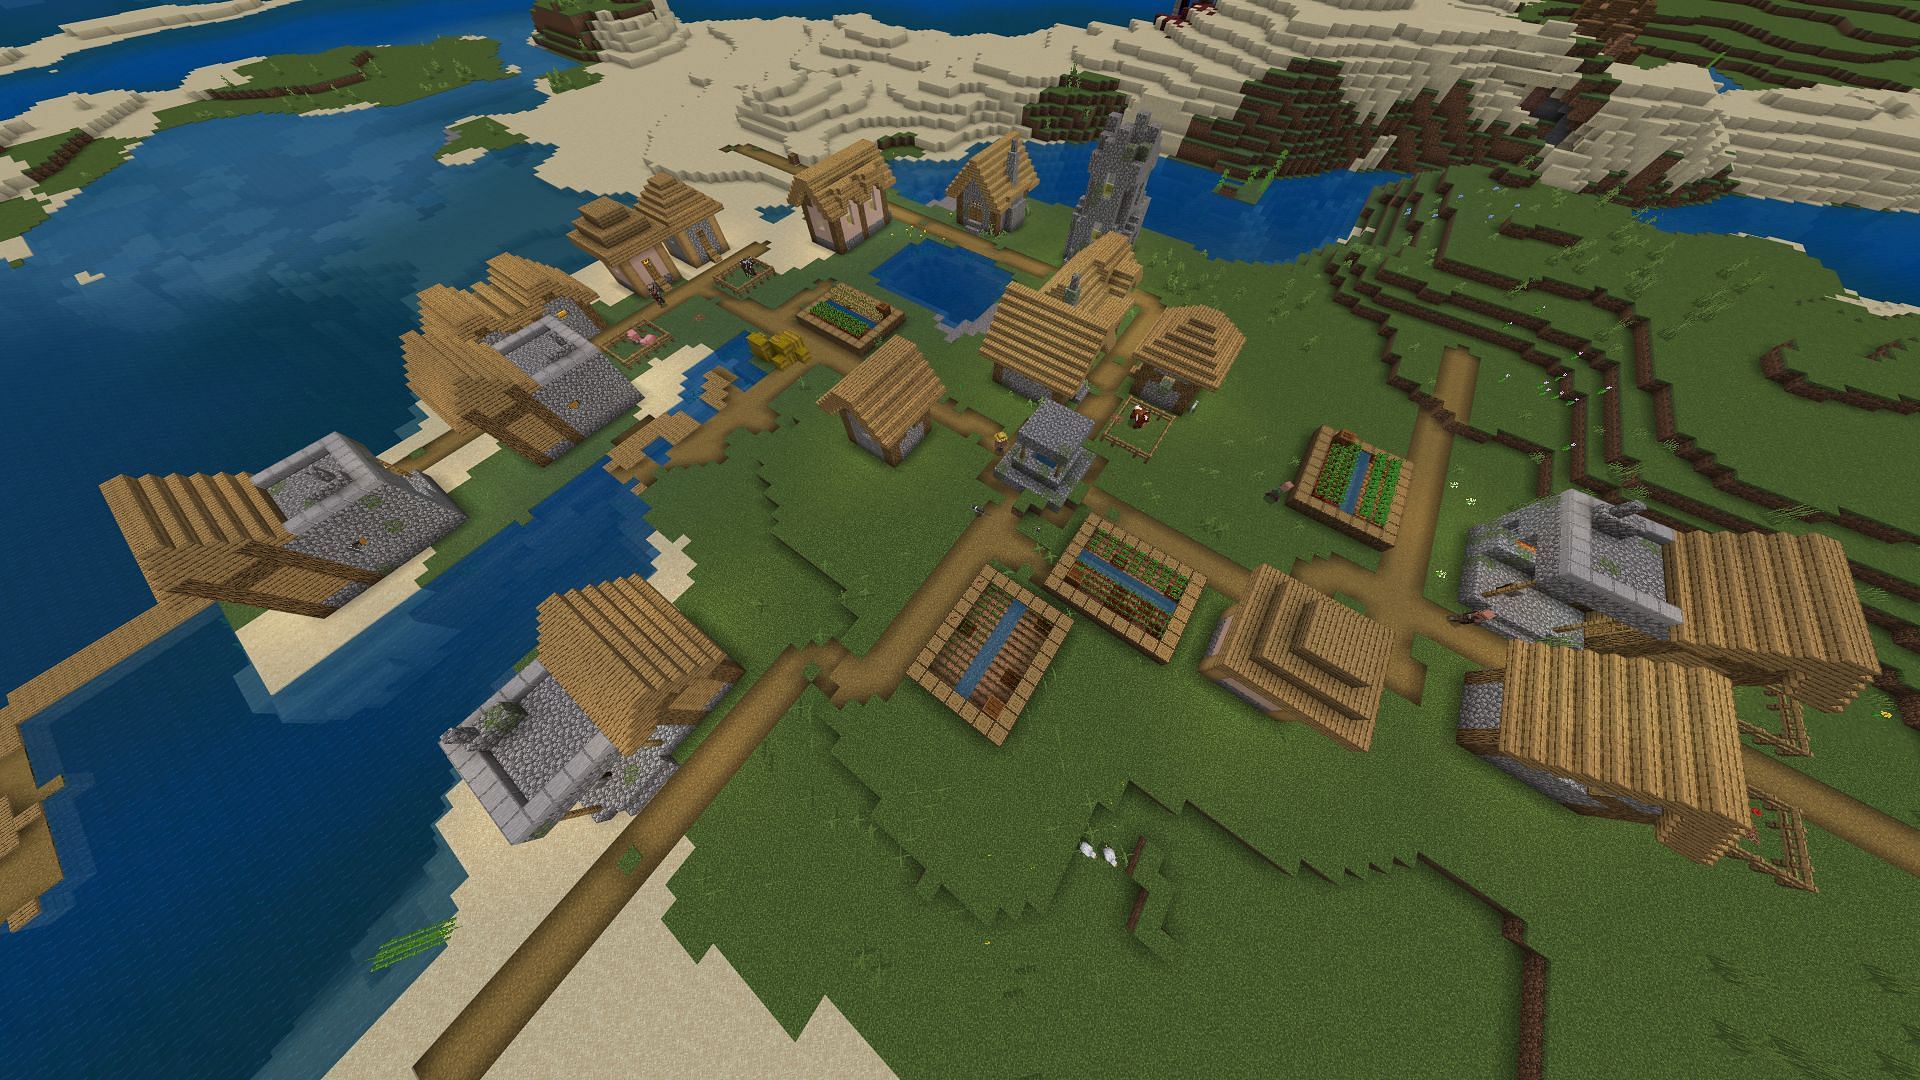 Fans can collect plenty of early-game surprises for free at this seed&#039;s spawn village (Image via FryBry/YouTube)